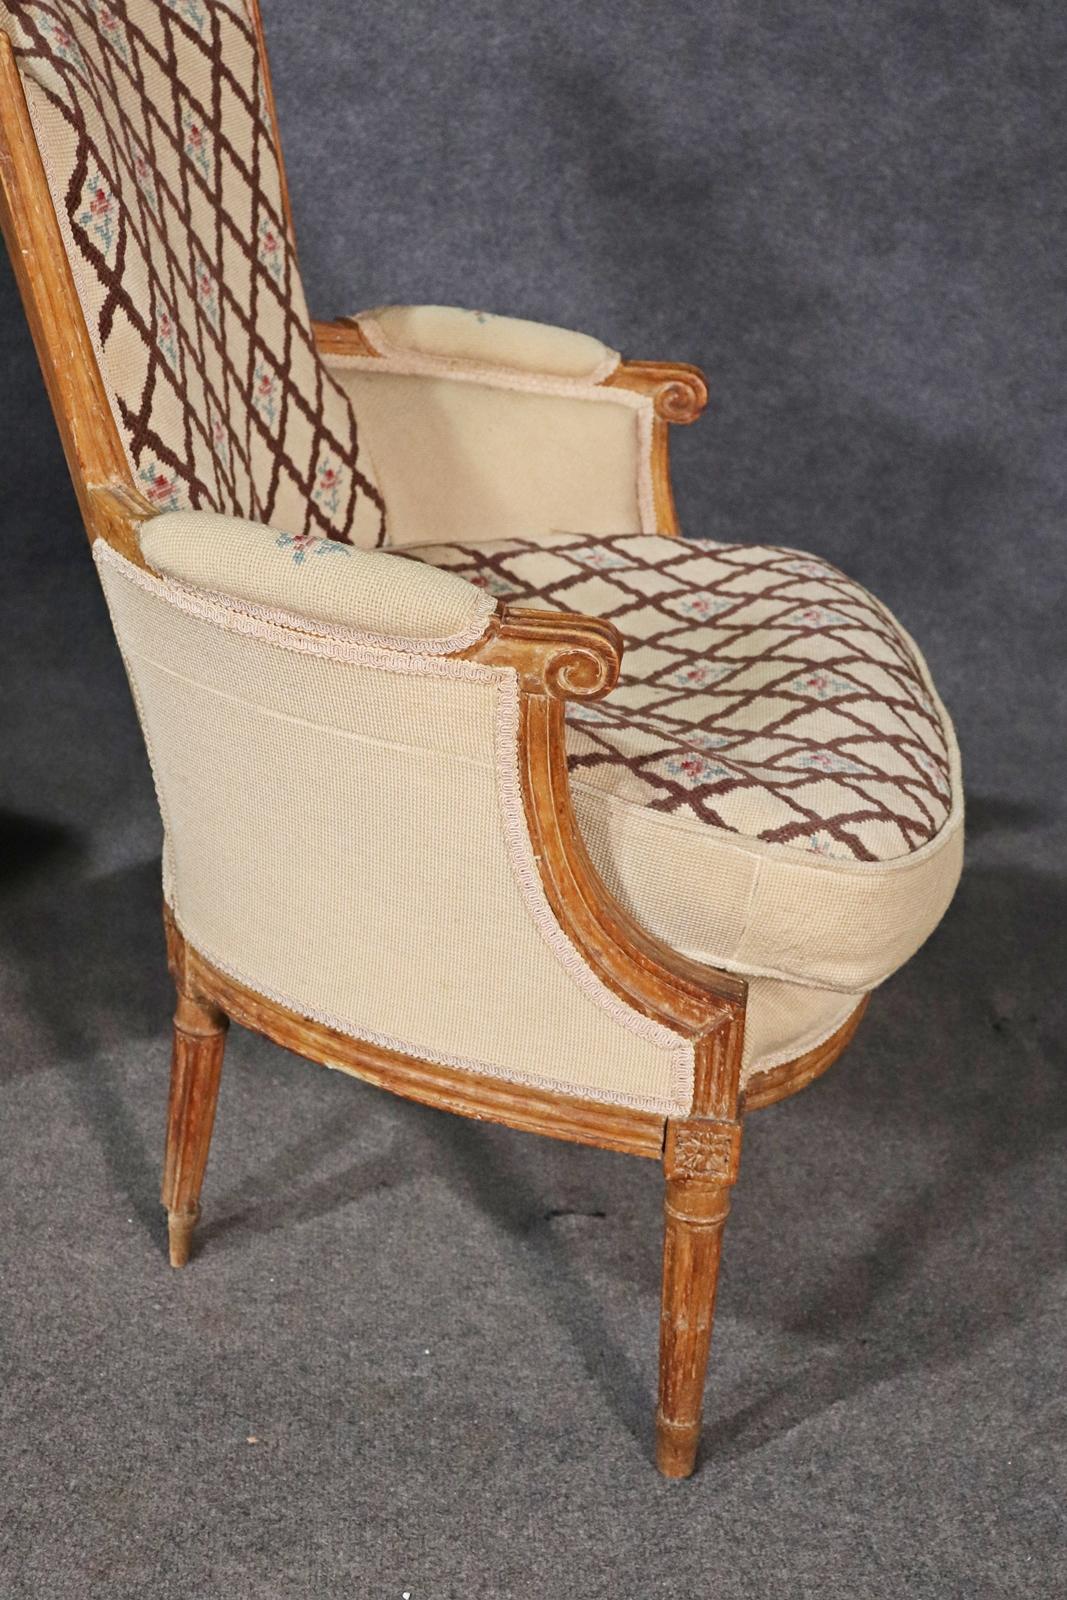 Companion Pair of Nearly Identical French Louis XVI Armchairs, Circa 1900 For Sale 11